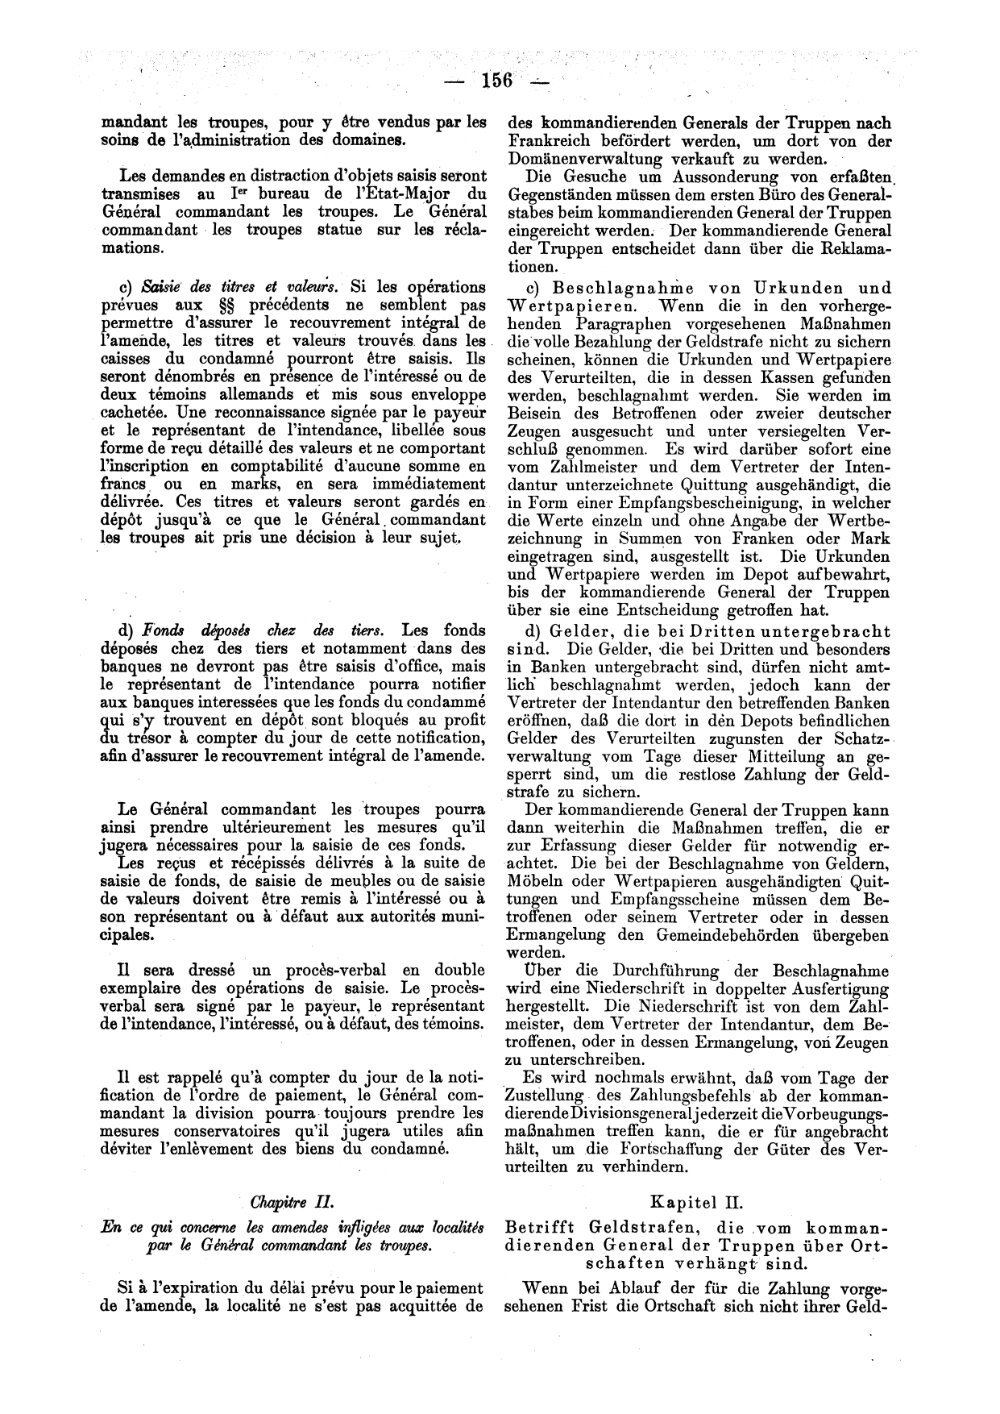 Scan of page 156